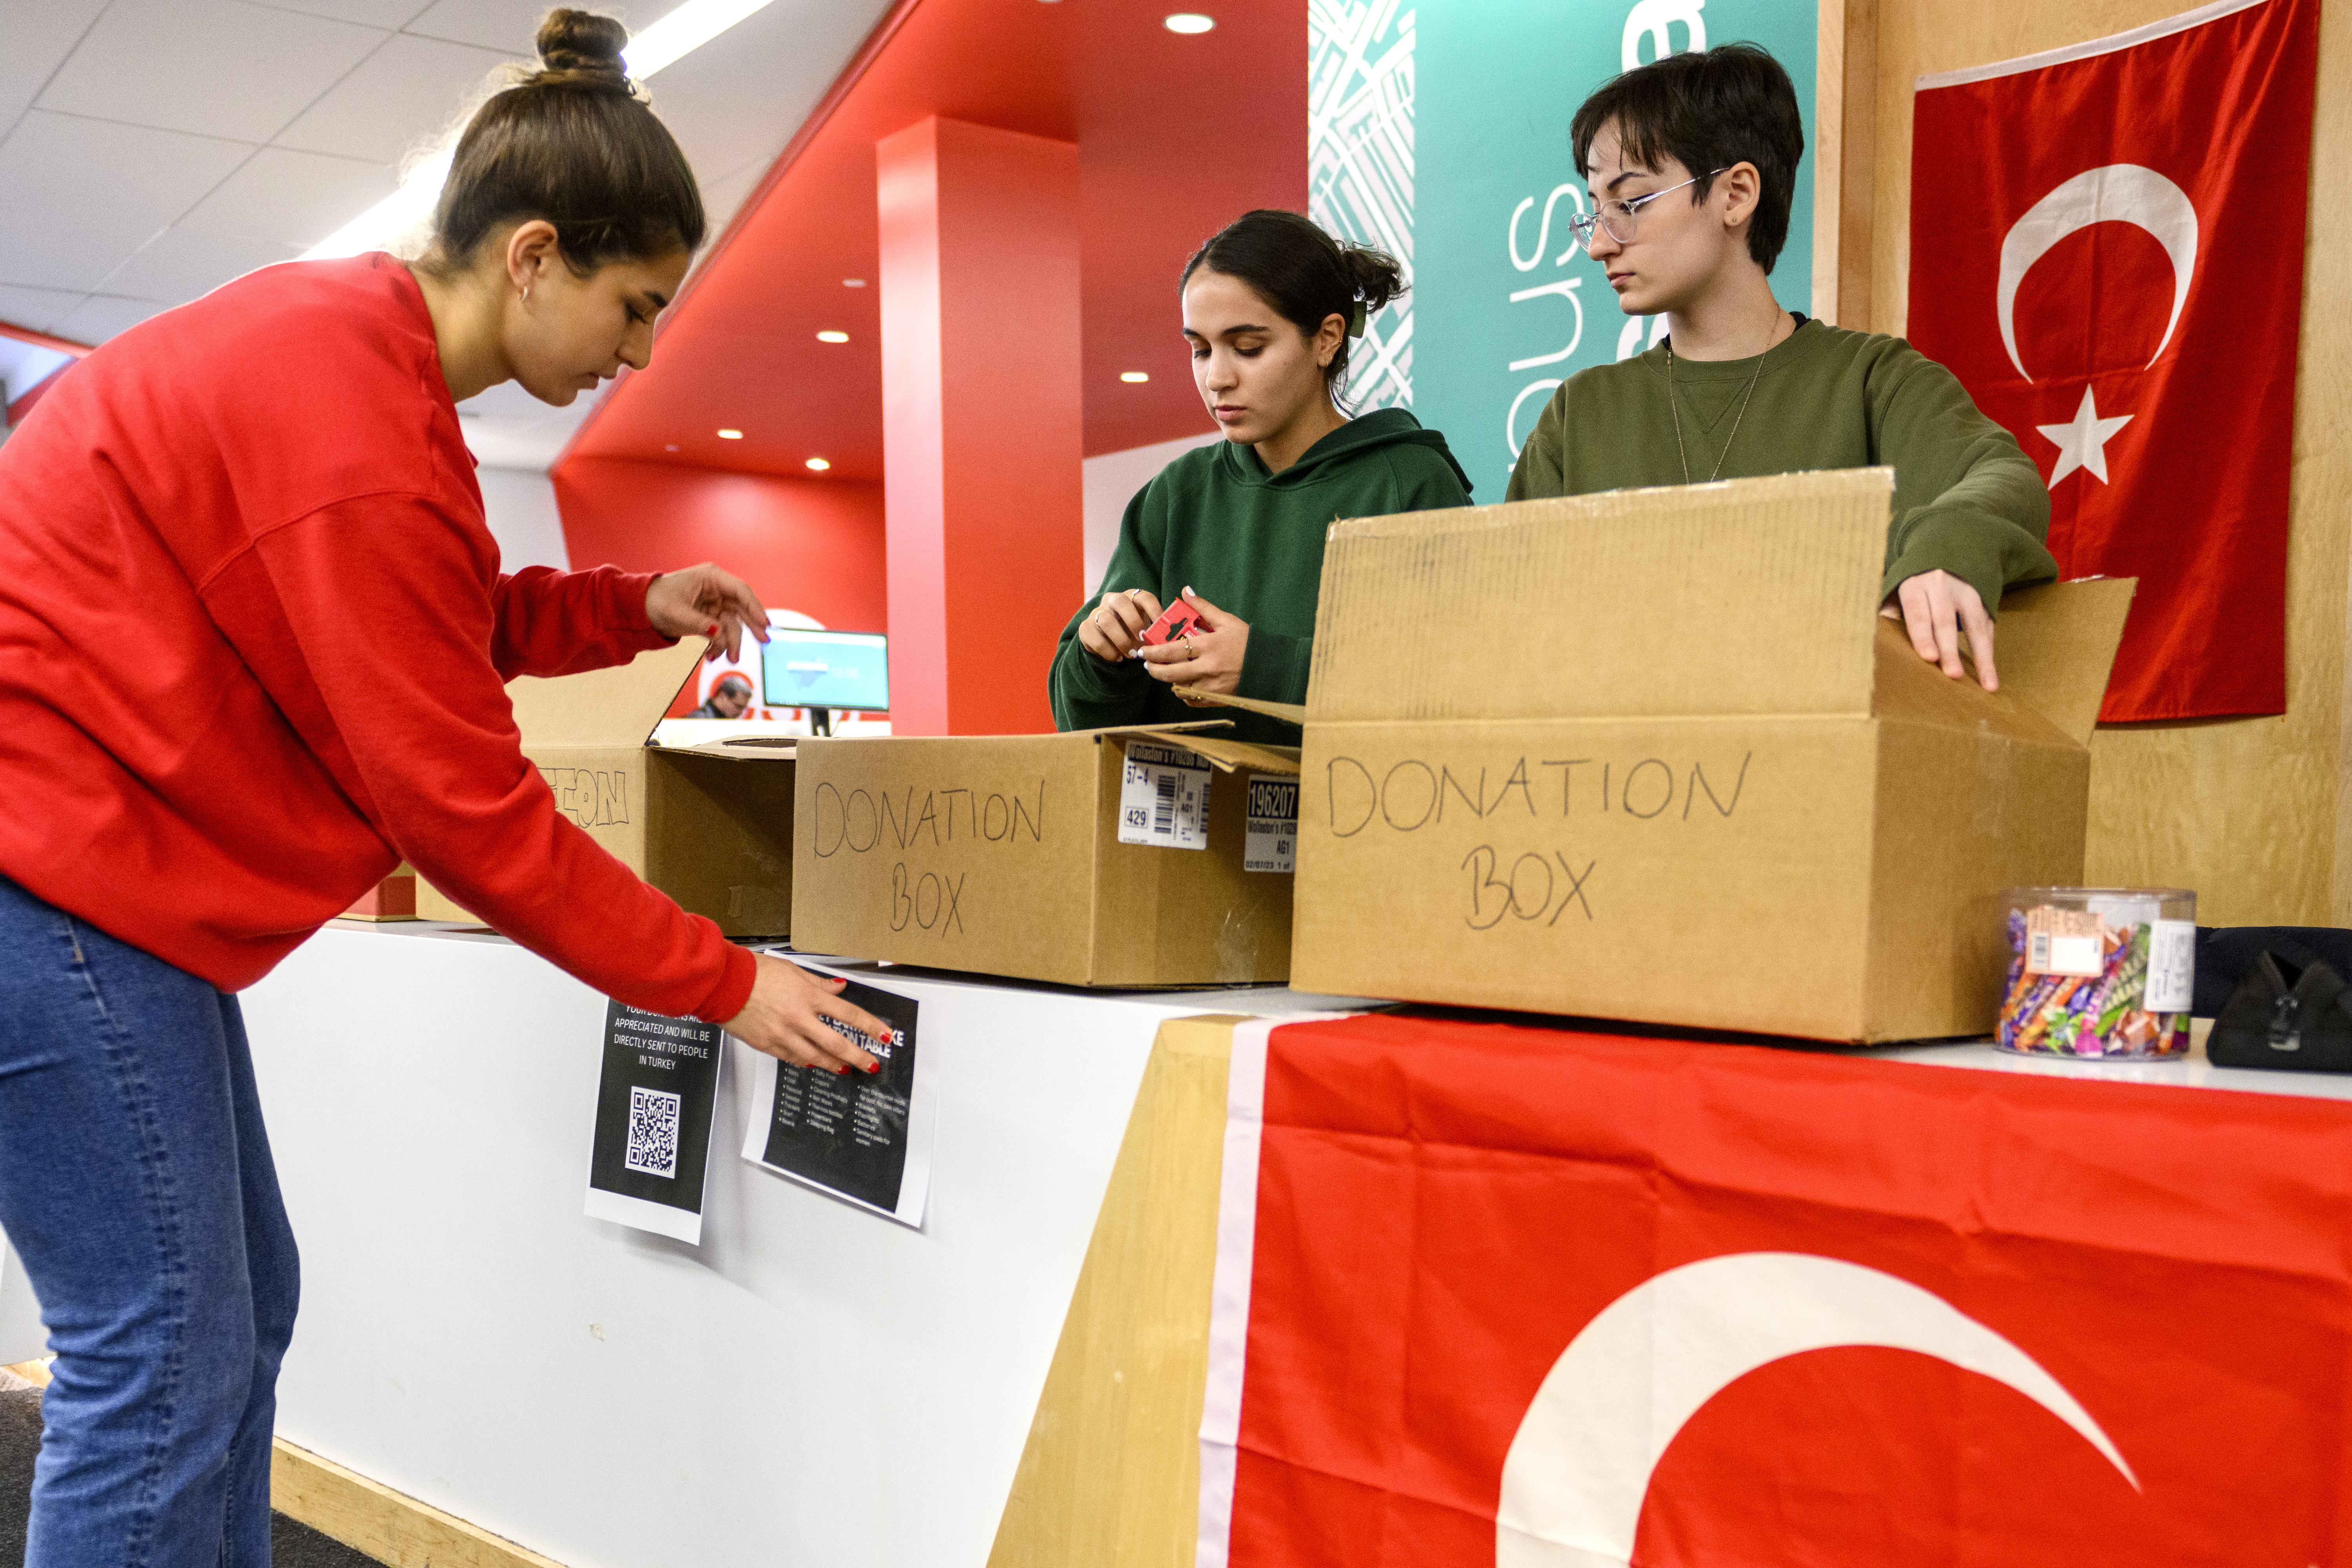 turkish student association members collecting donations